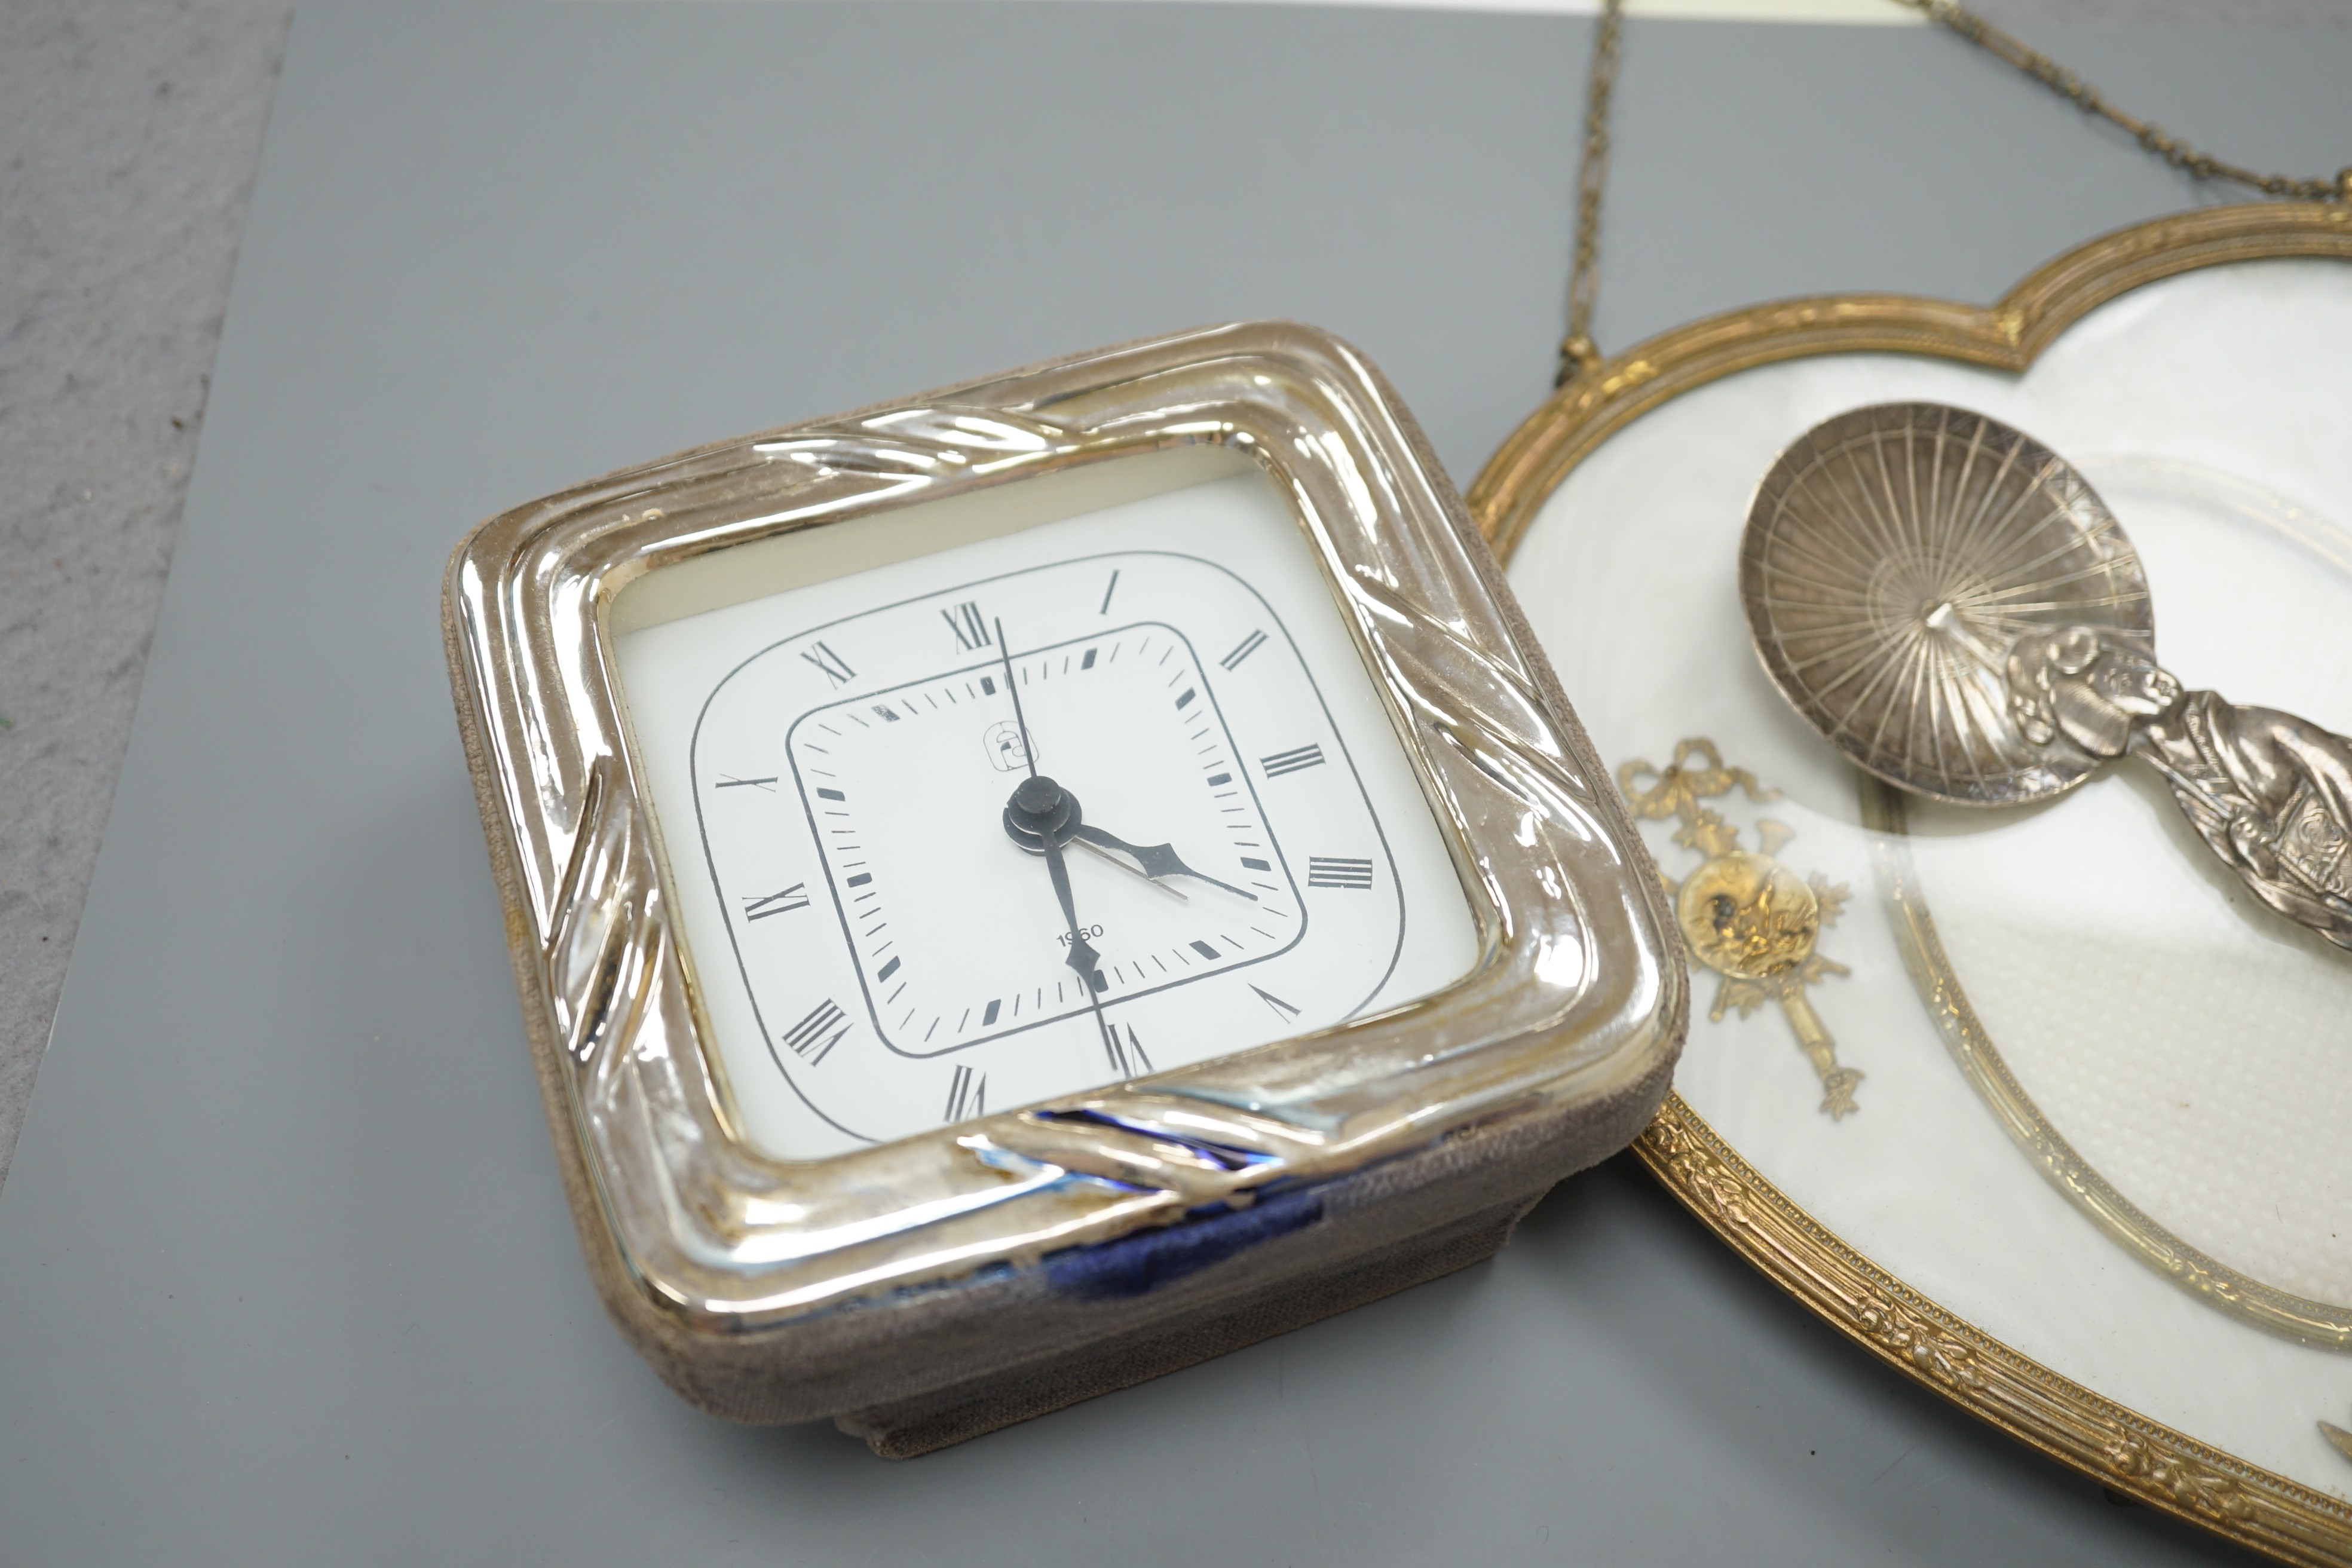 A 19th century gilt heart-shaped frame, A Japanese sterling figural spoon, a 1930's silver cream jug and modern silver mounted clock, photo frame 20 cms high.